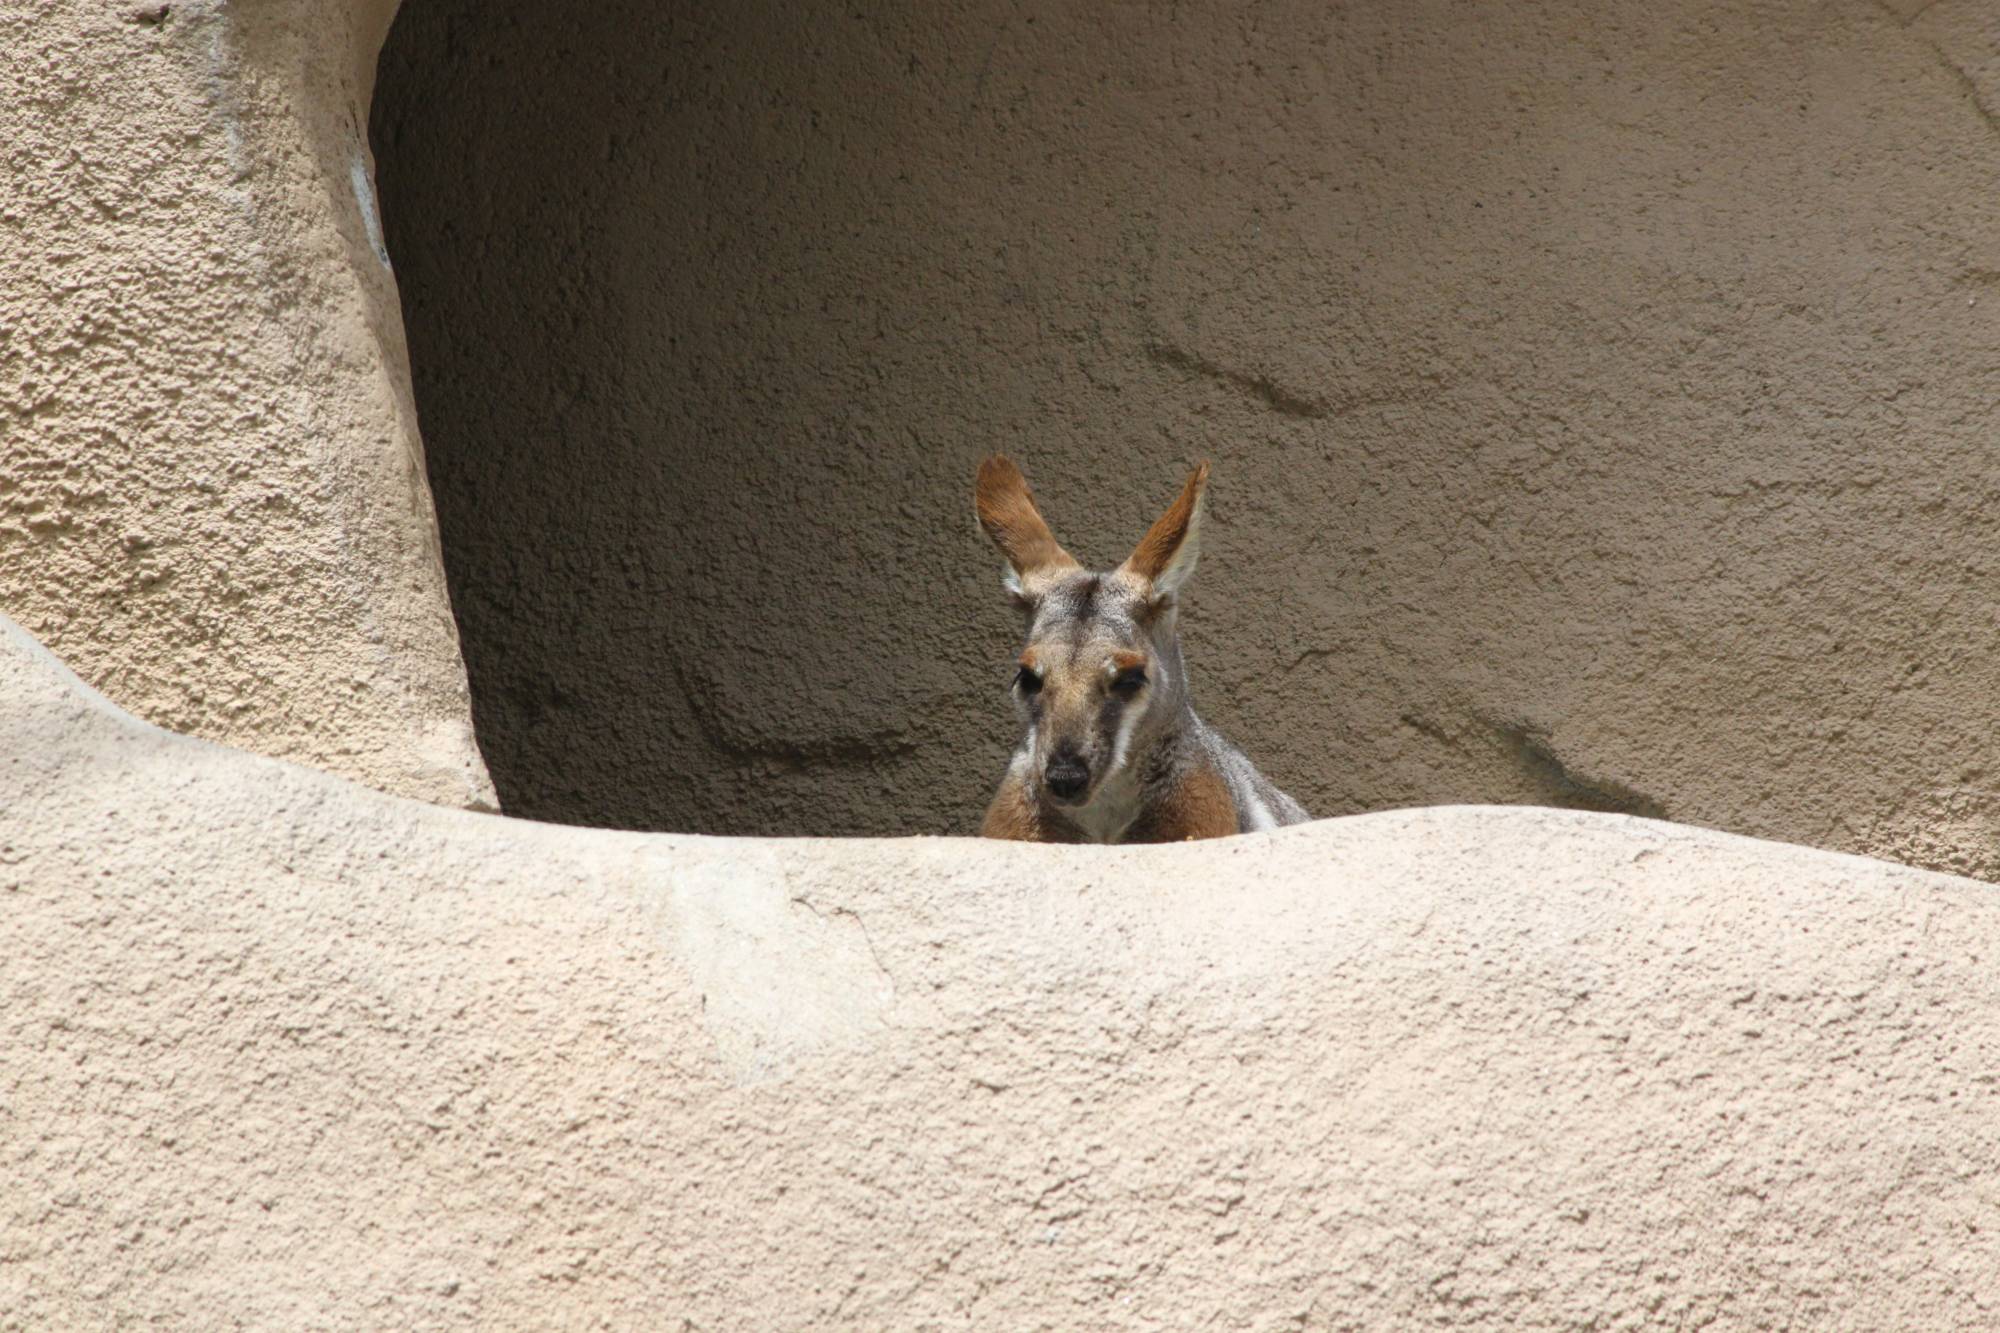 Wallaby at the San Diego Zoo